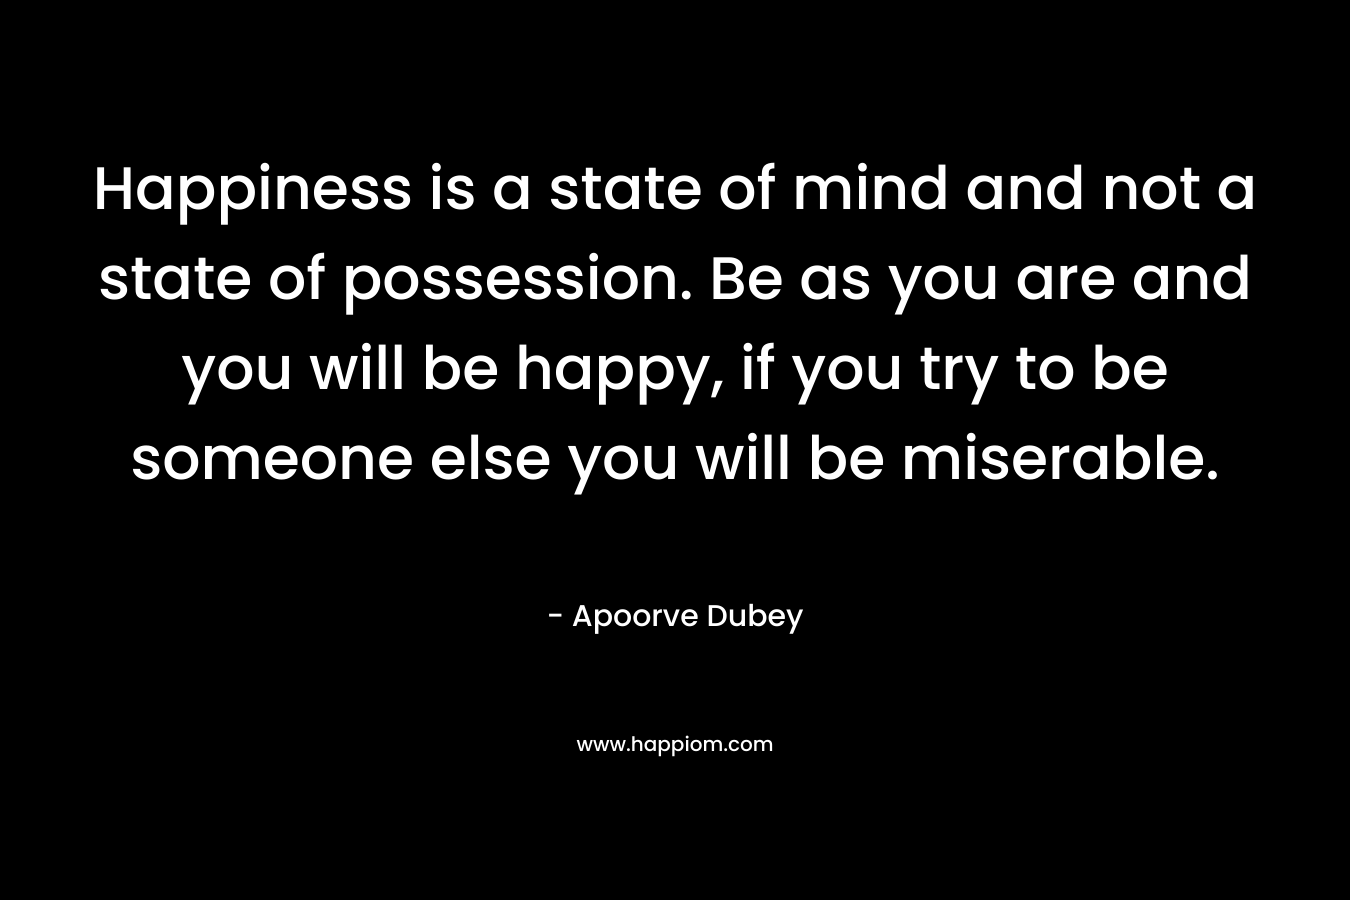 Happiness is a state of mind and not a state of possession. Be as you are and you will be happy, if you try to be someone else you will be miserable.